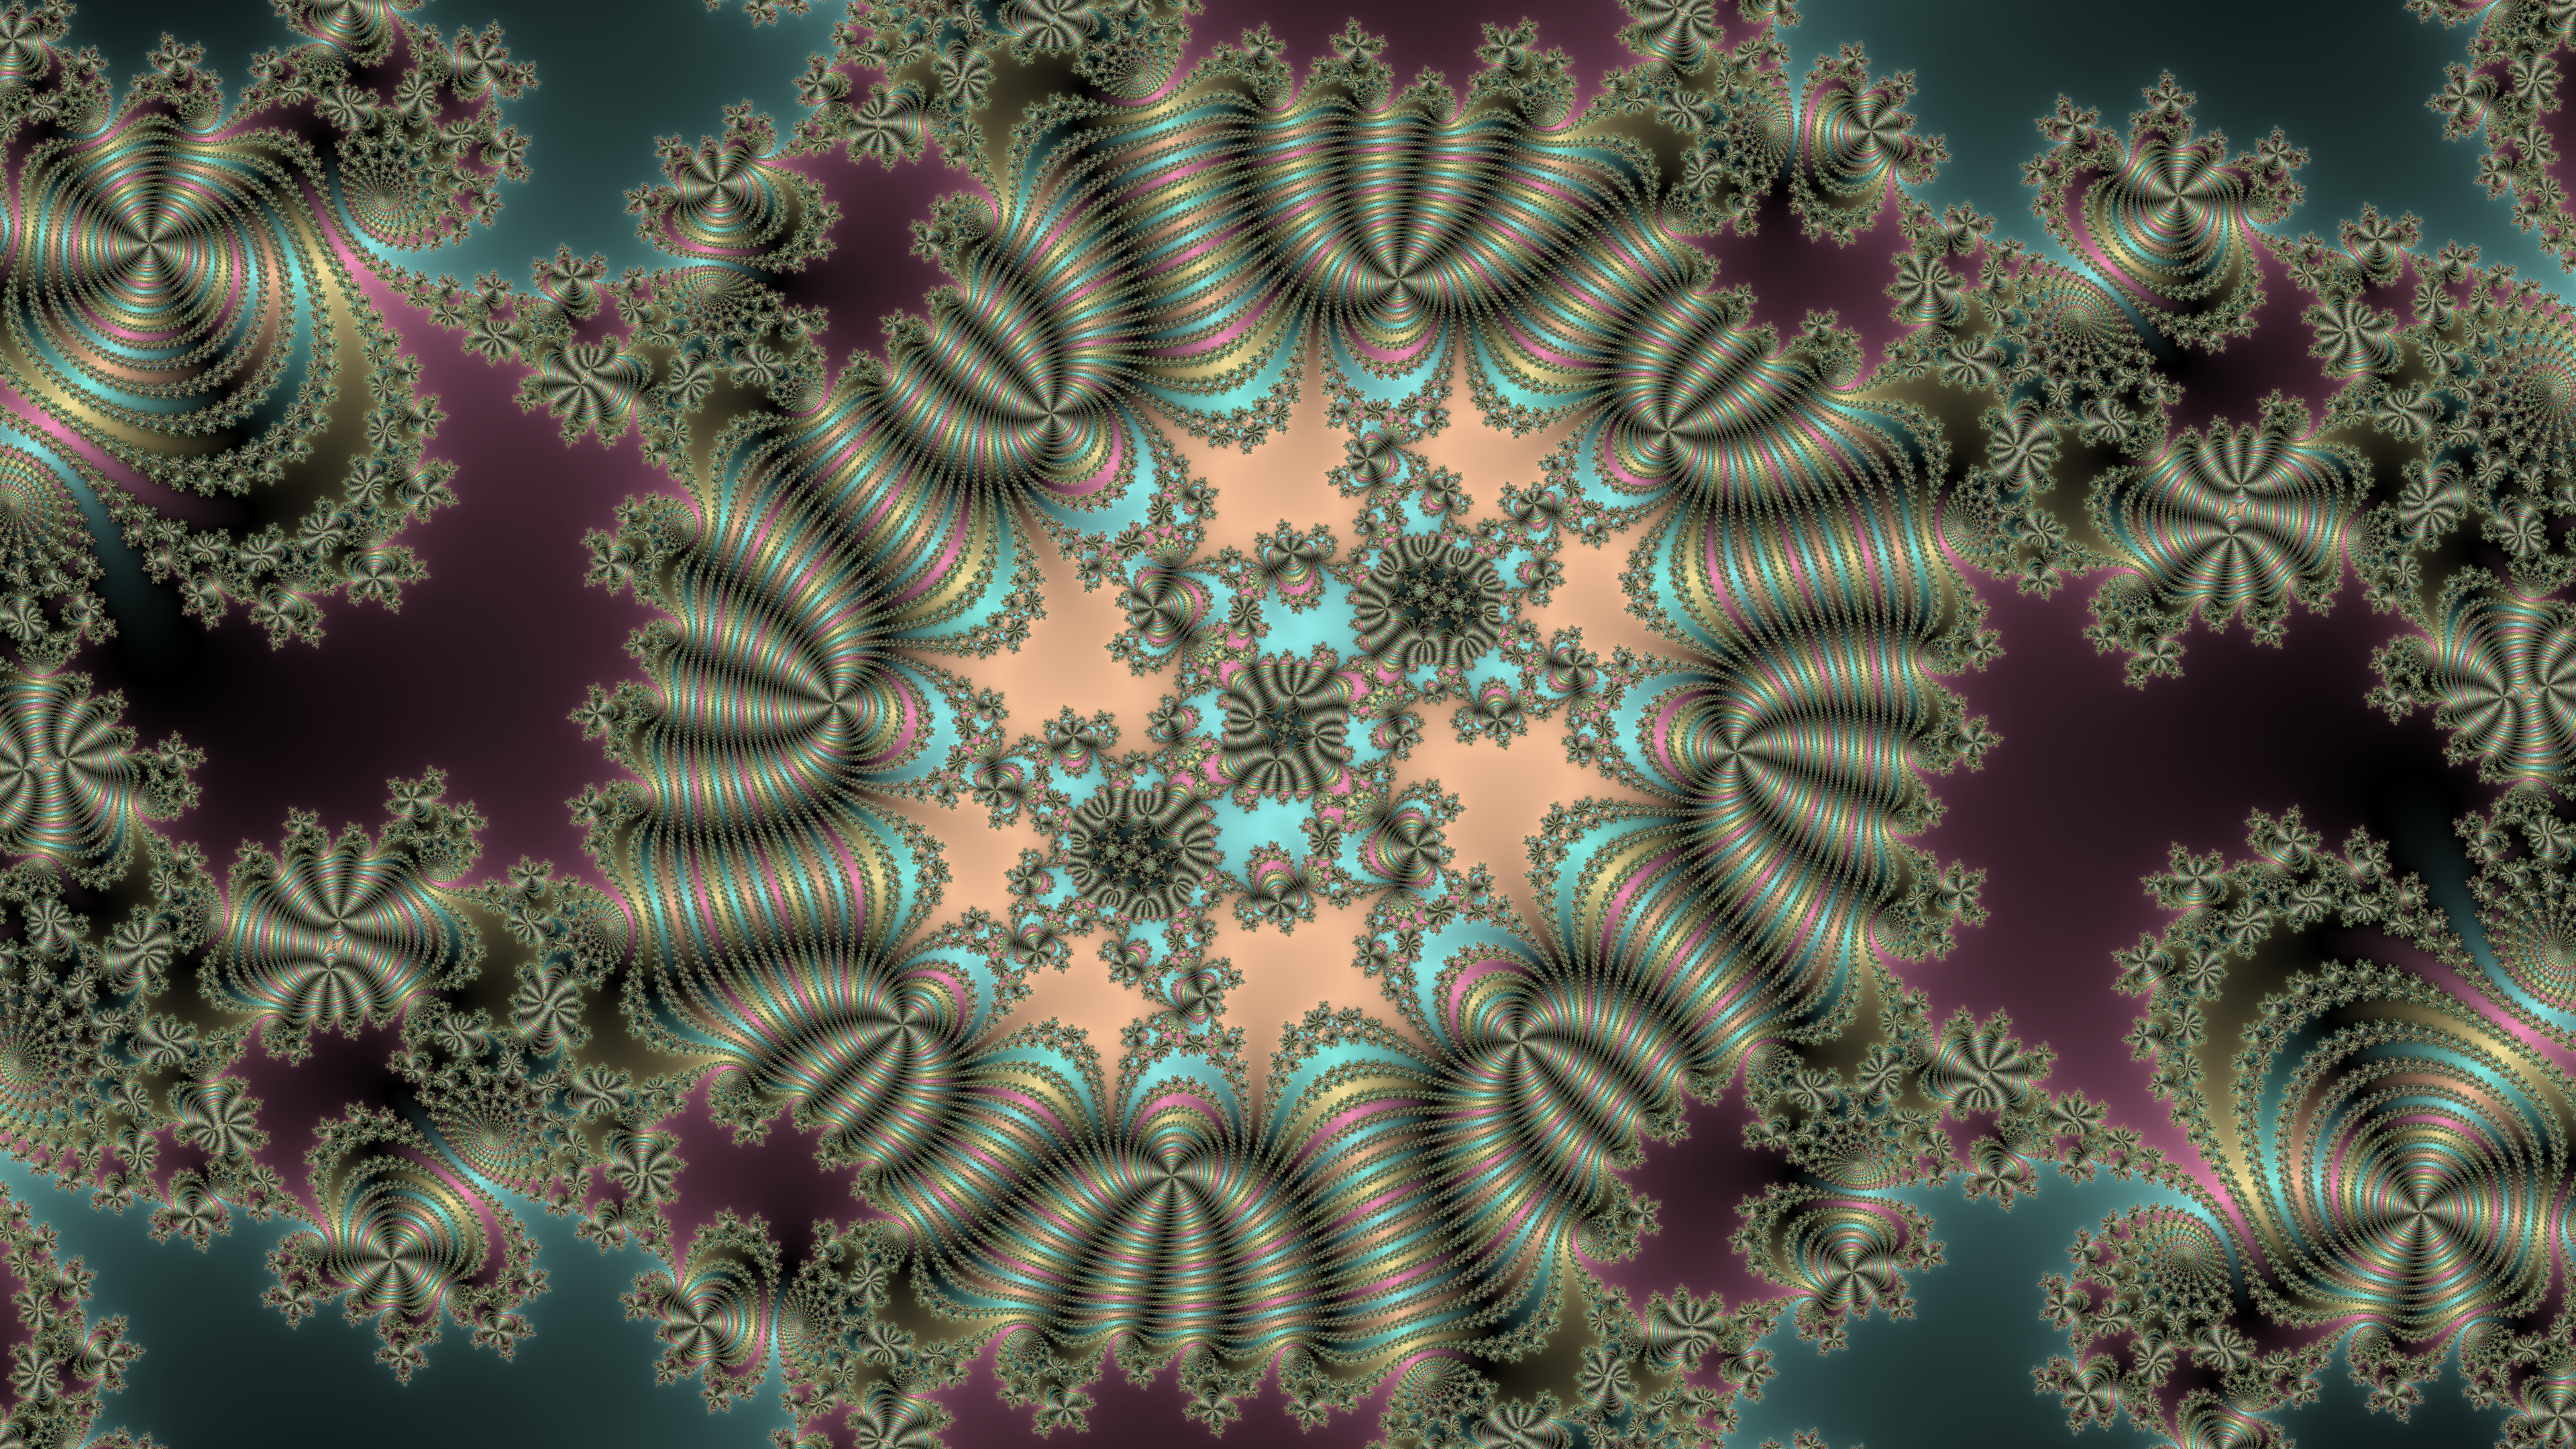 Gallery: Fractals / MoireOval.